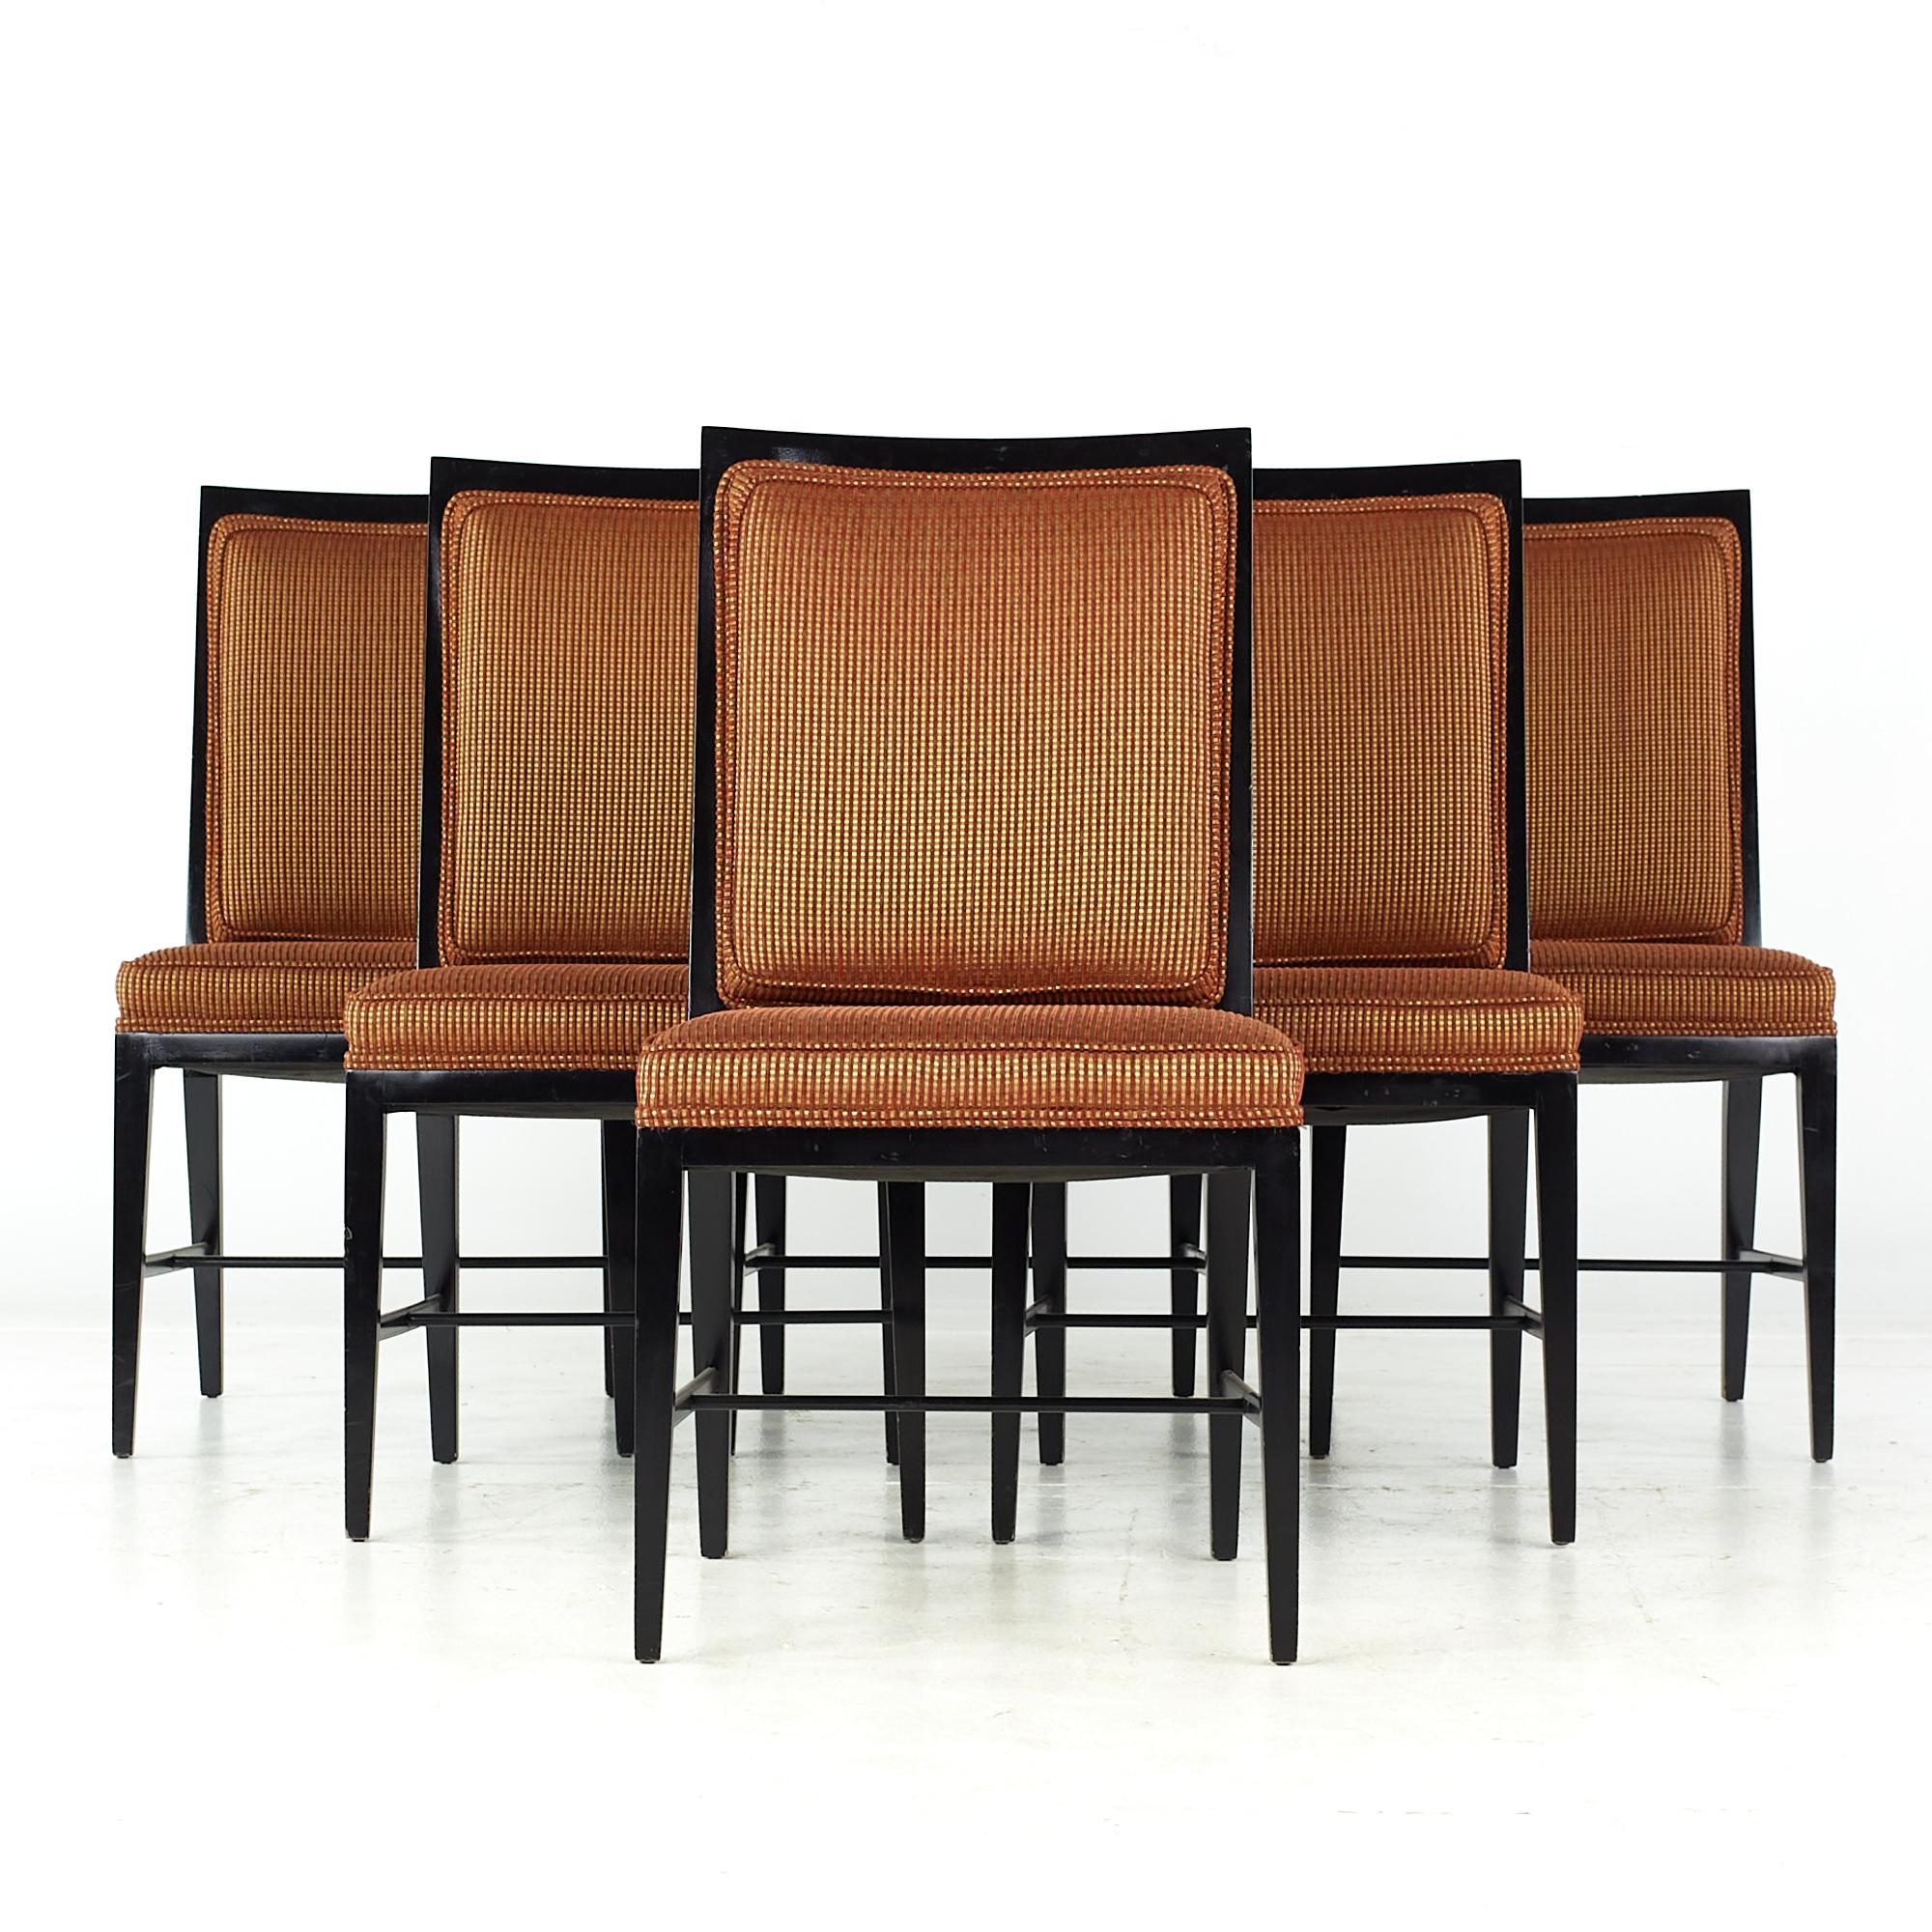 Paul McCobb Style midcentury Ebonized dining chairs - set of 6

Each chair measures: 19 wide x 21.25 deep x 36 inches high, with a seat height/chair clearance of 18 inches

All pieces of furniture can be had in what we call restored vintage